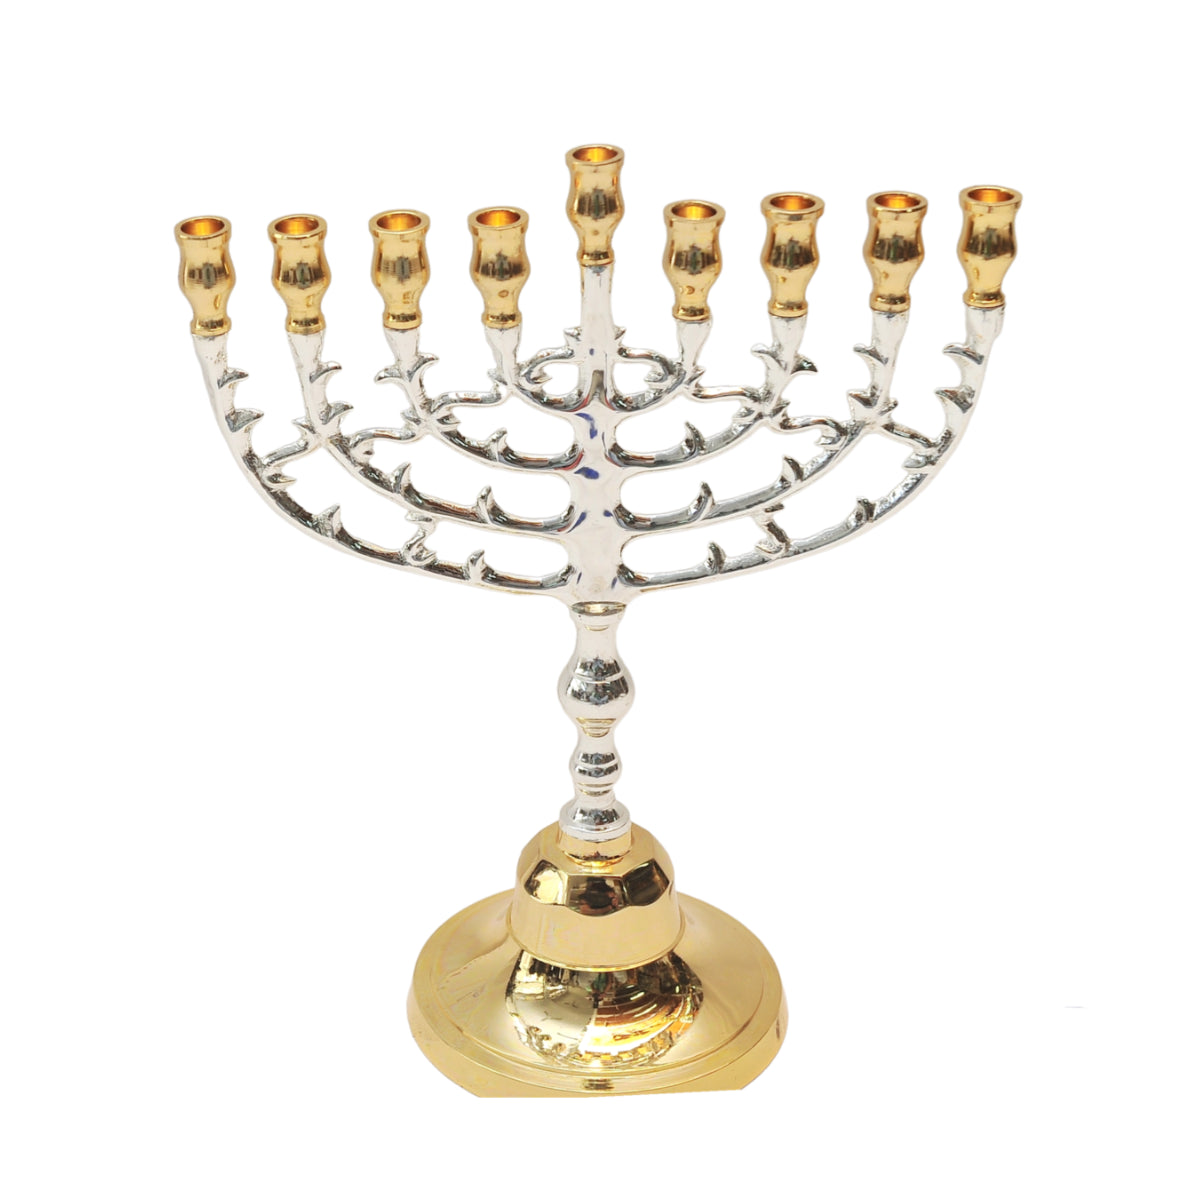 High Quality Temple Menorah Hanukkiah Gold & Silver Plated Candle Holder Israel 9.84 / 8.66 inch inch